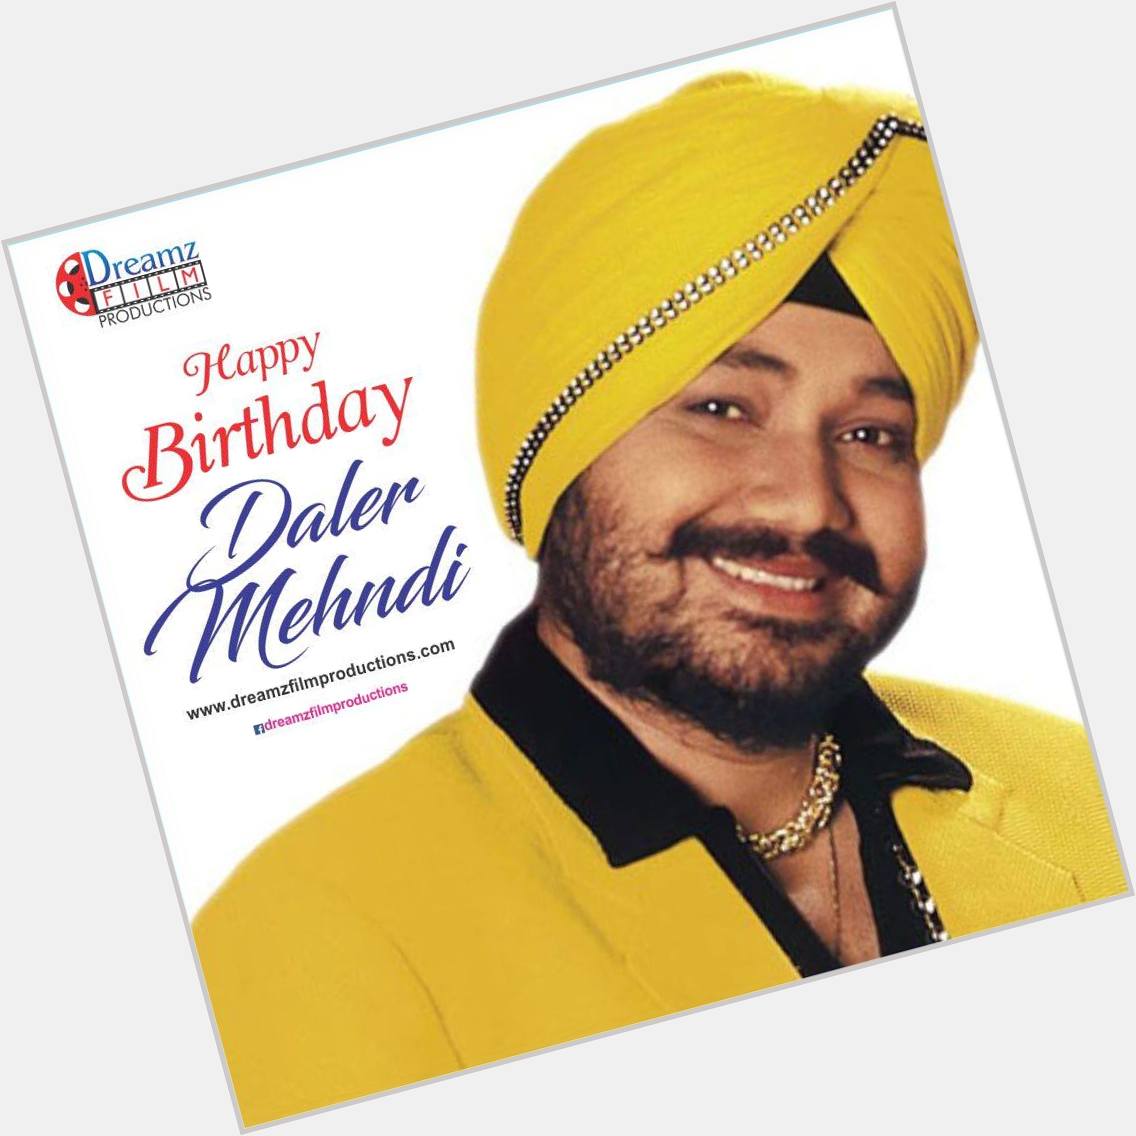 Dreamz Film Productions wishes a very  to Daler Mehndi (Bollywood Singer) 